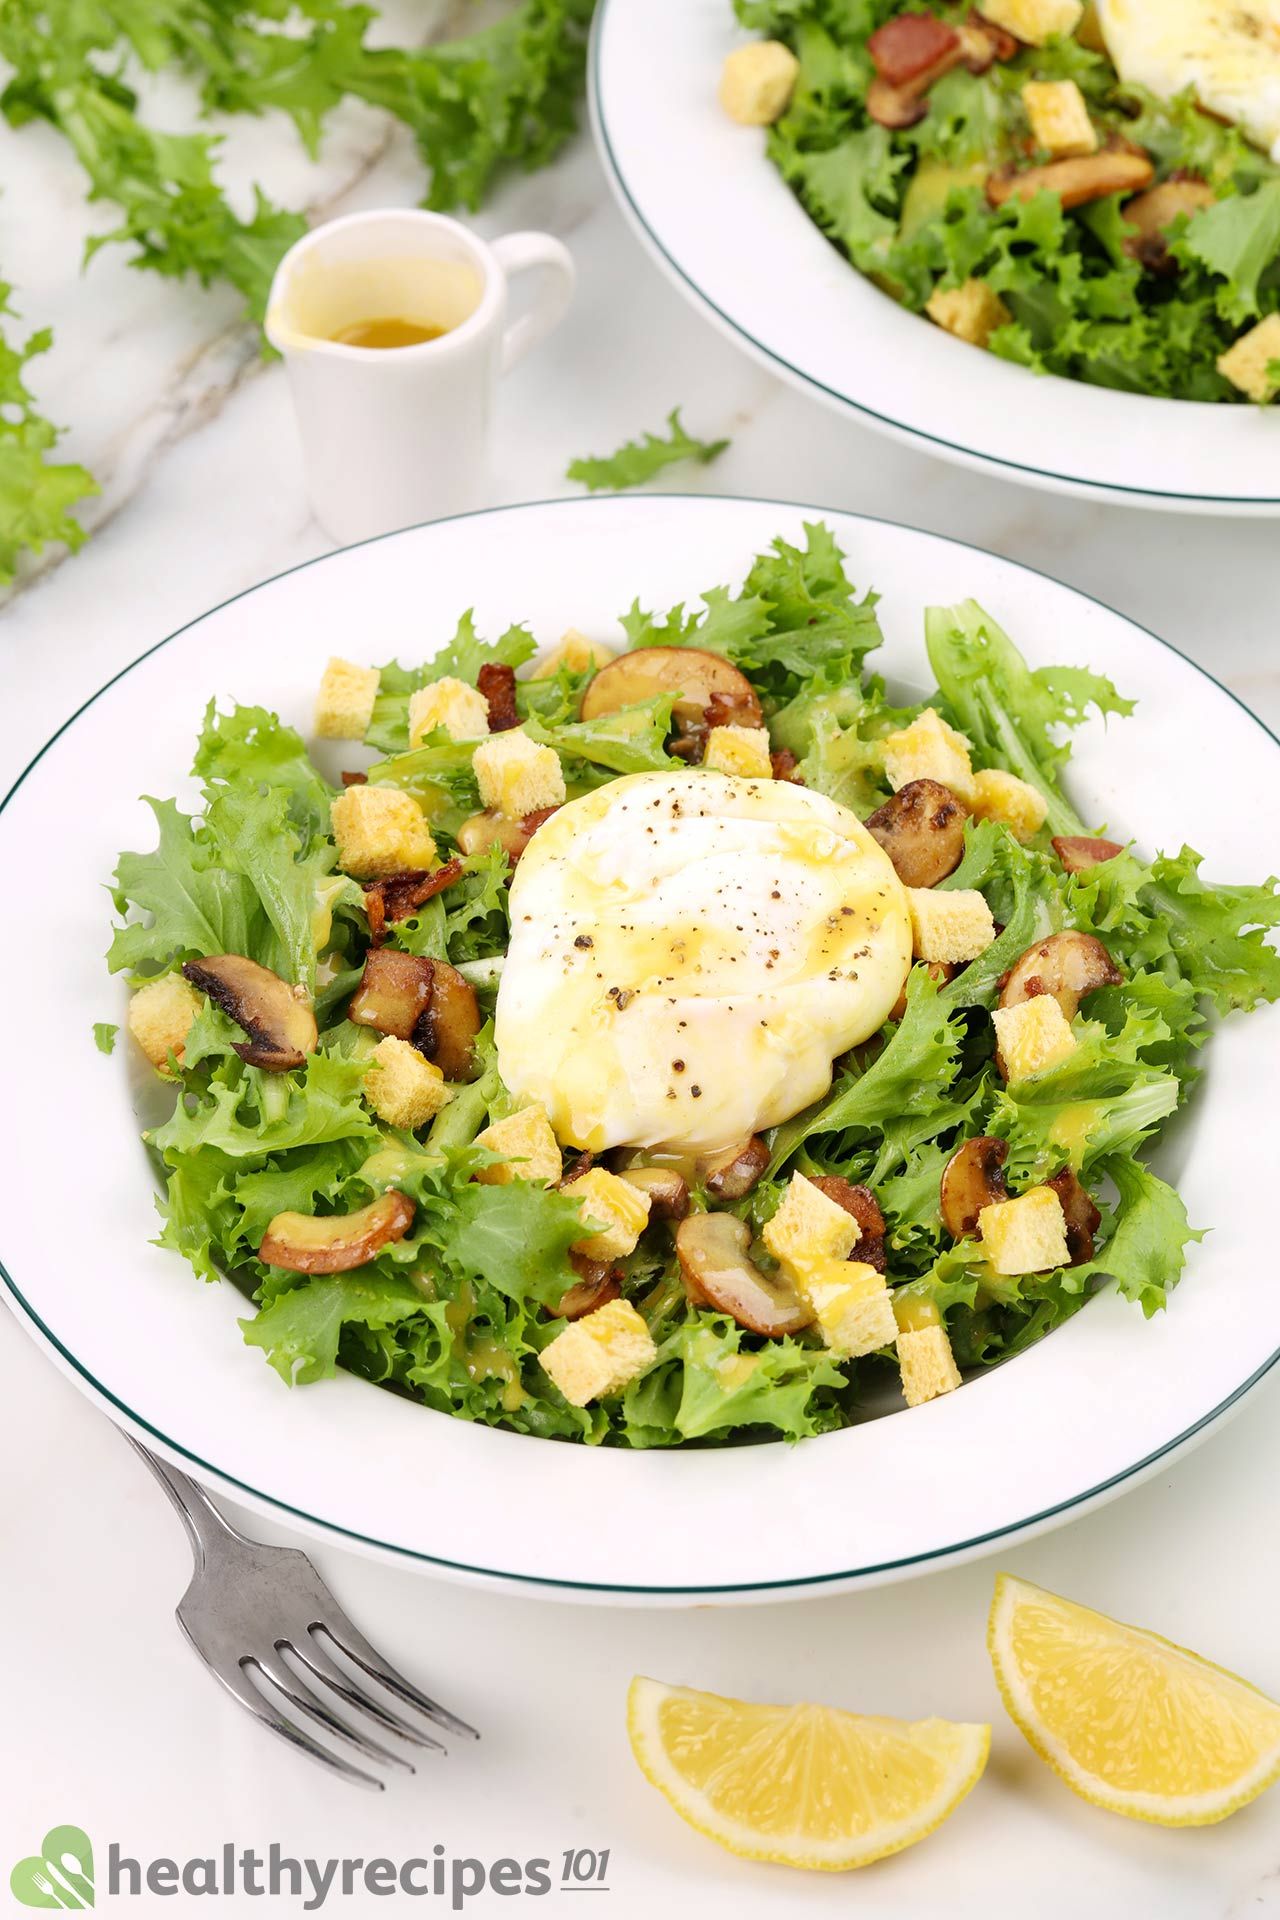 what to serve with lyonnaise salad